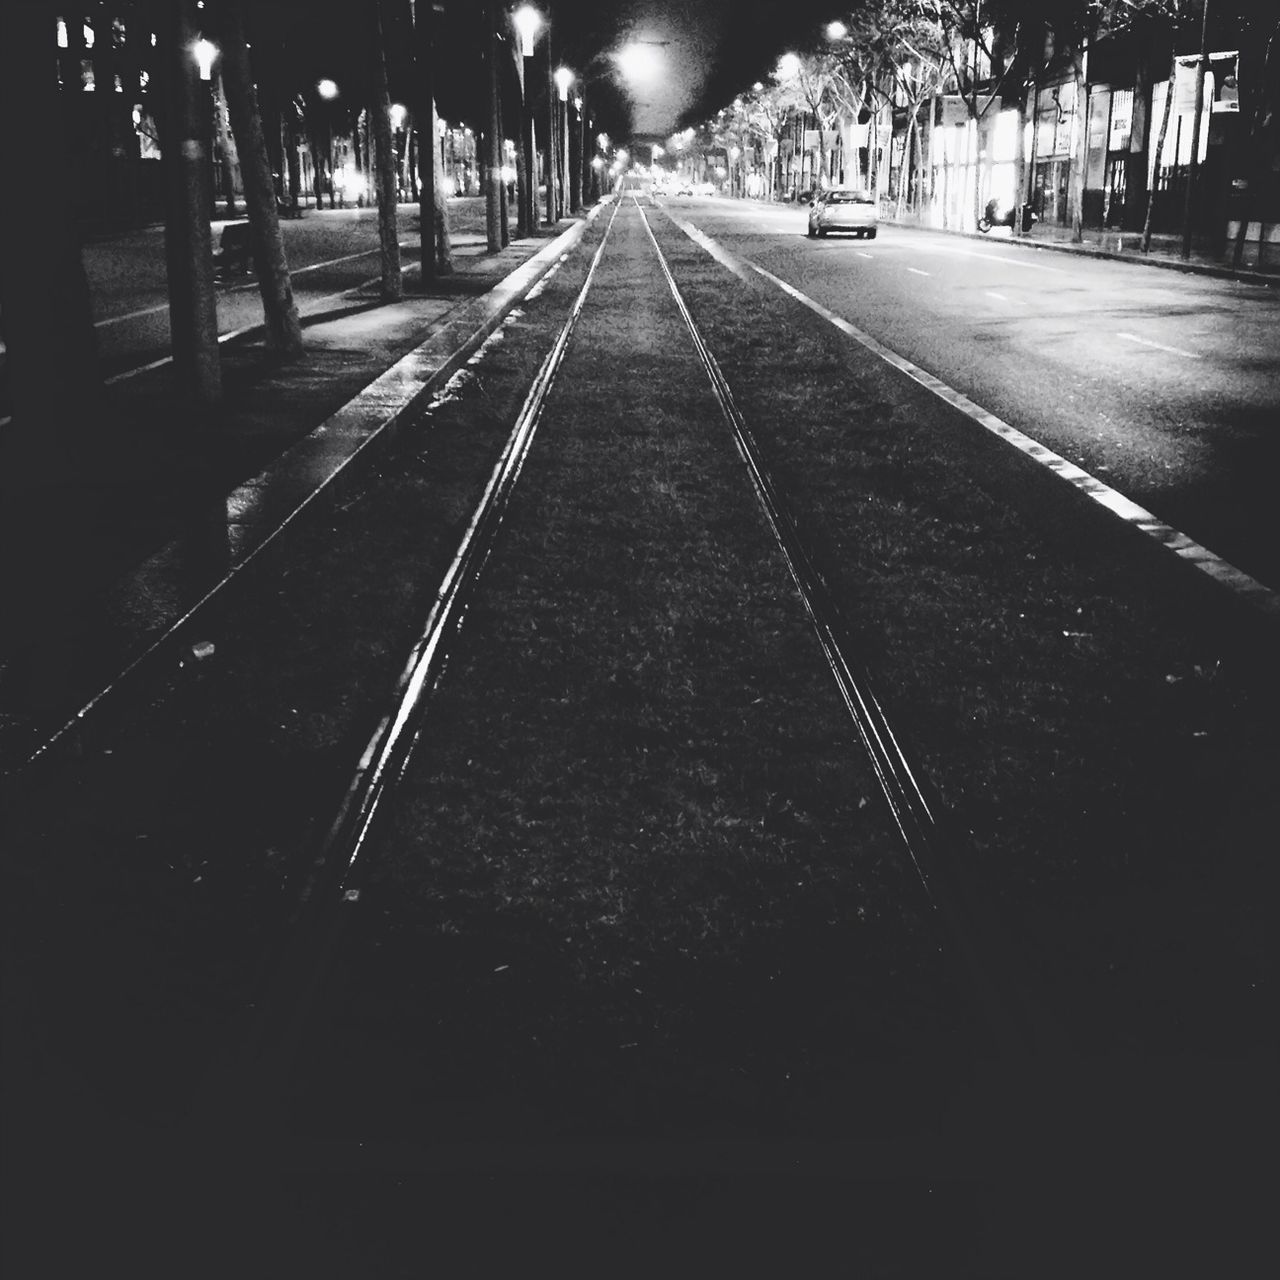 night, the way forward, transportation, illuminated, diminishing perspective, vanishing point, road, street, road marking, empty, city, street light, outdoors, asphalt, no people, incidental people, surface level, railroad track, built structure, in a row